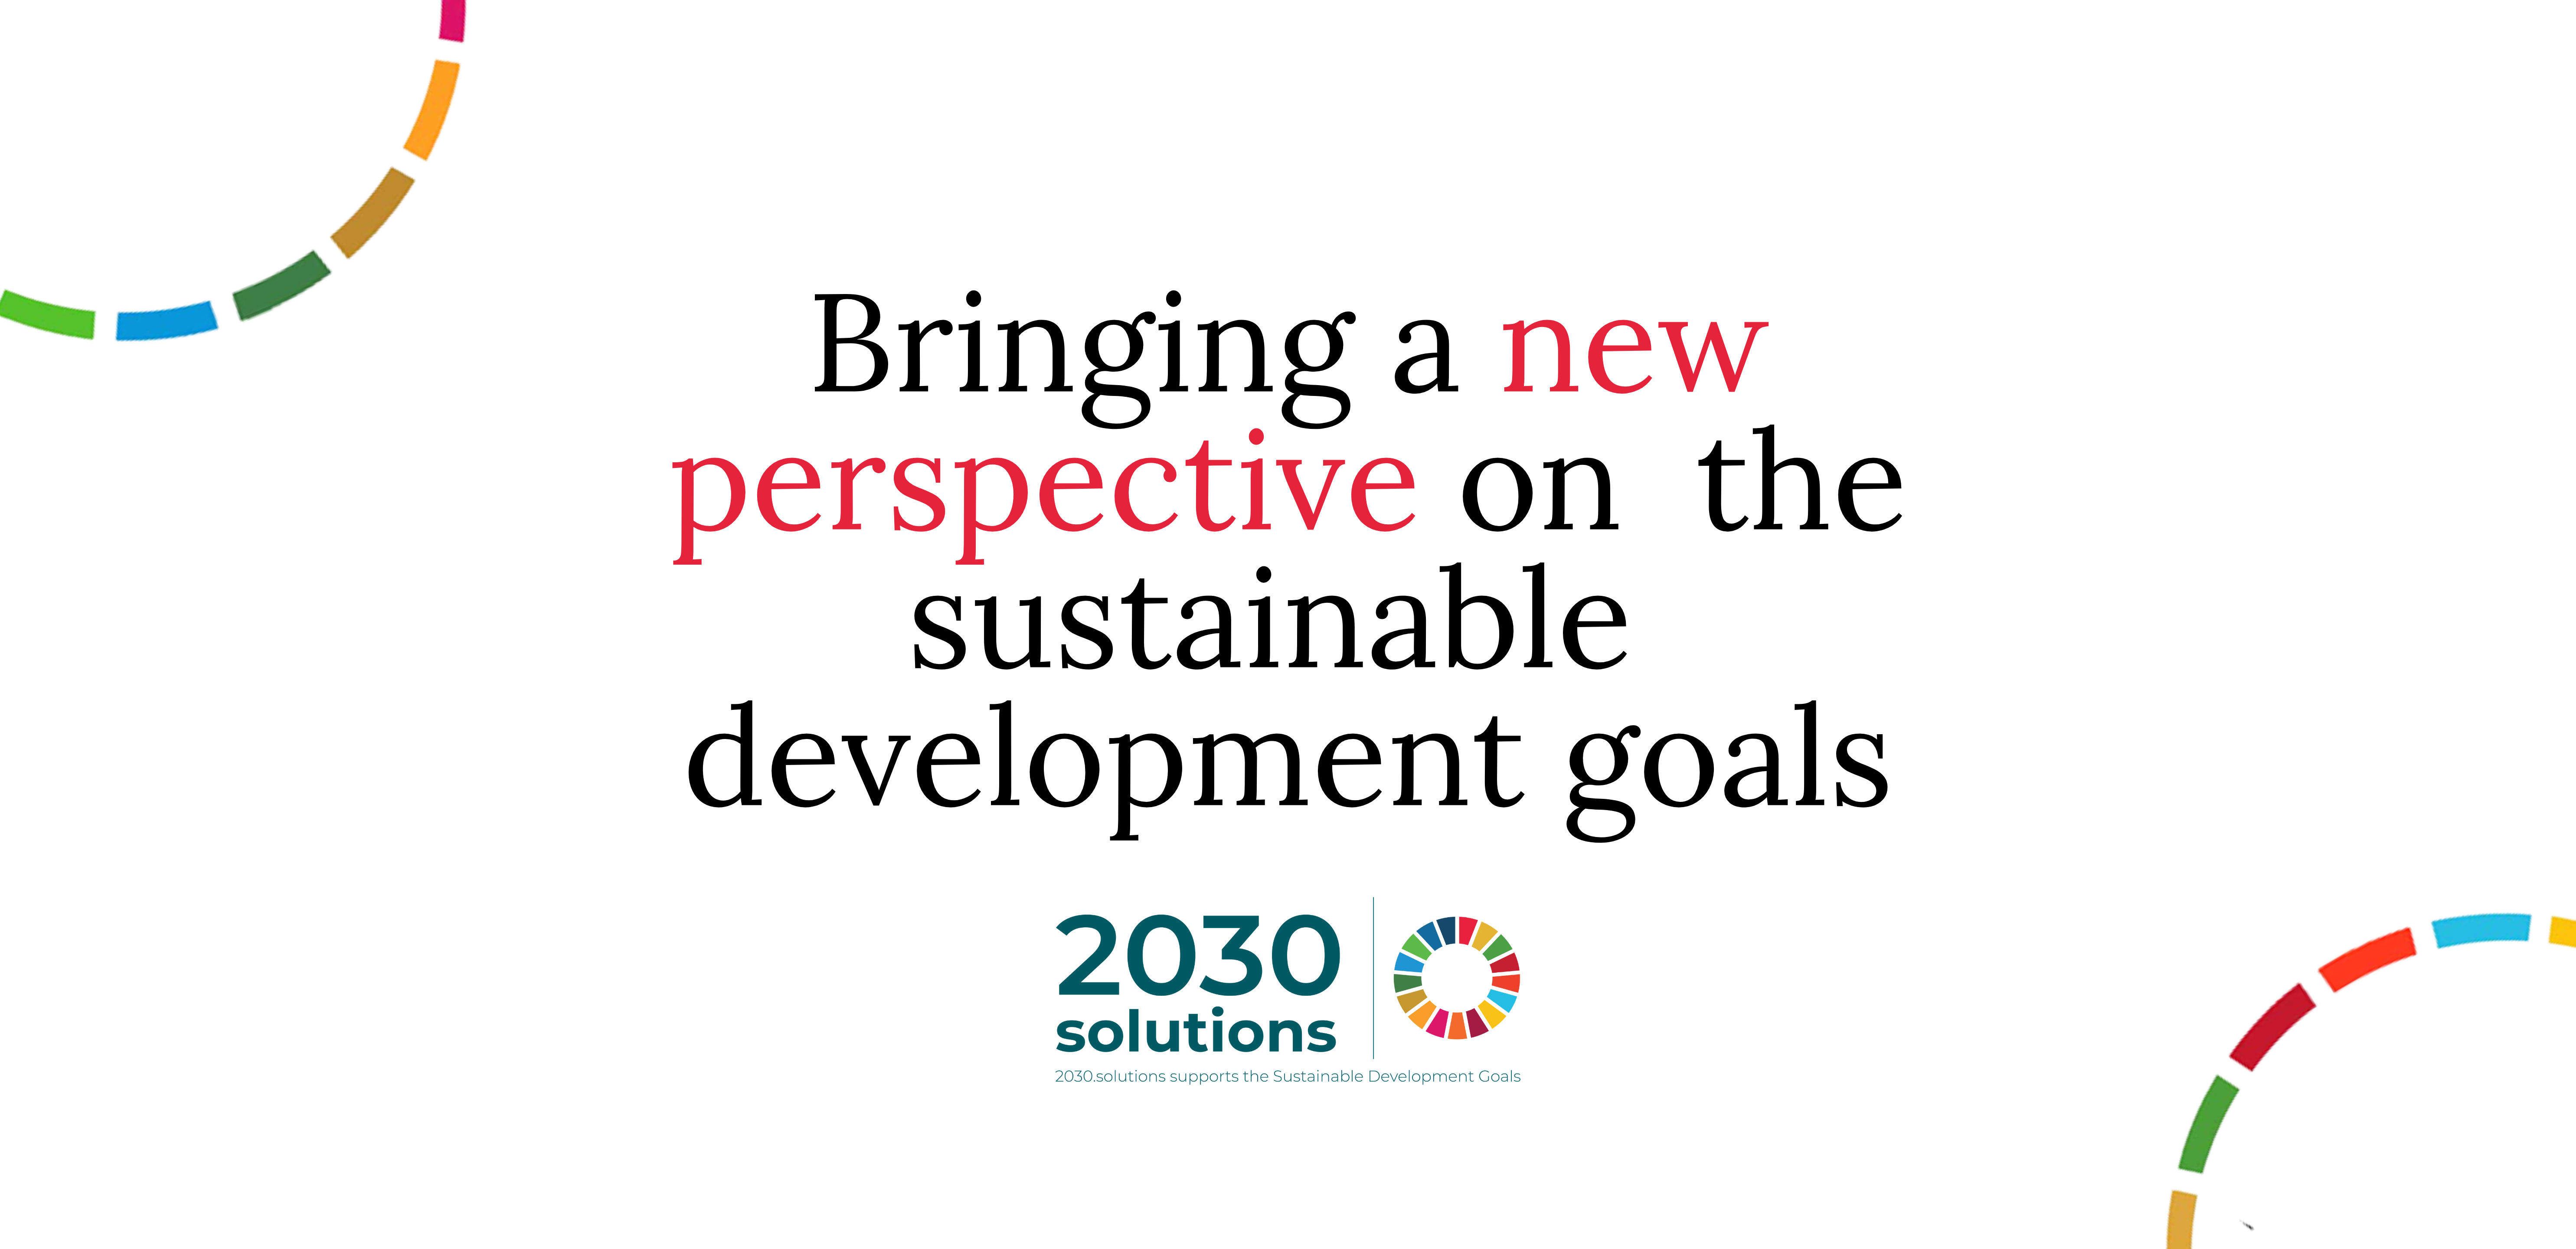 2030.solutions Platform Launches to Highlight Sustainable Development Goals